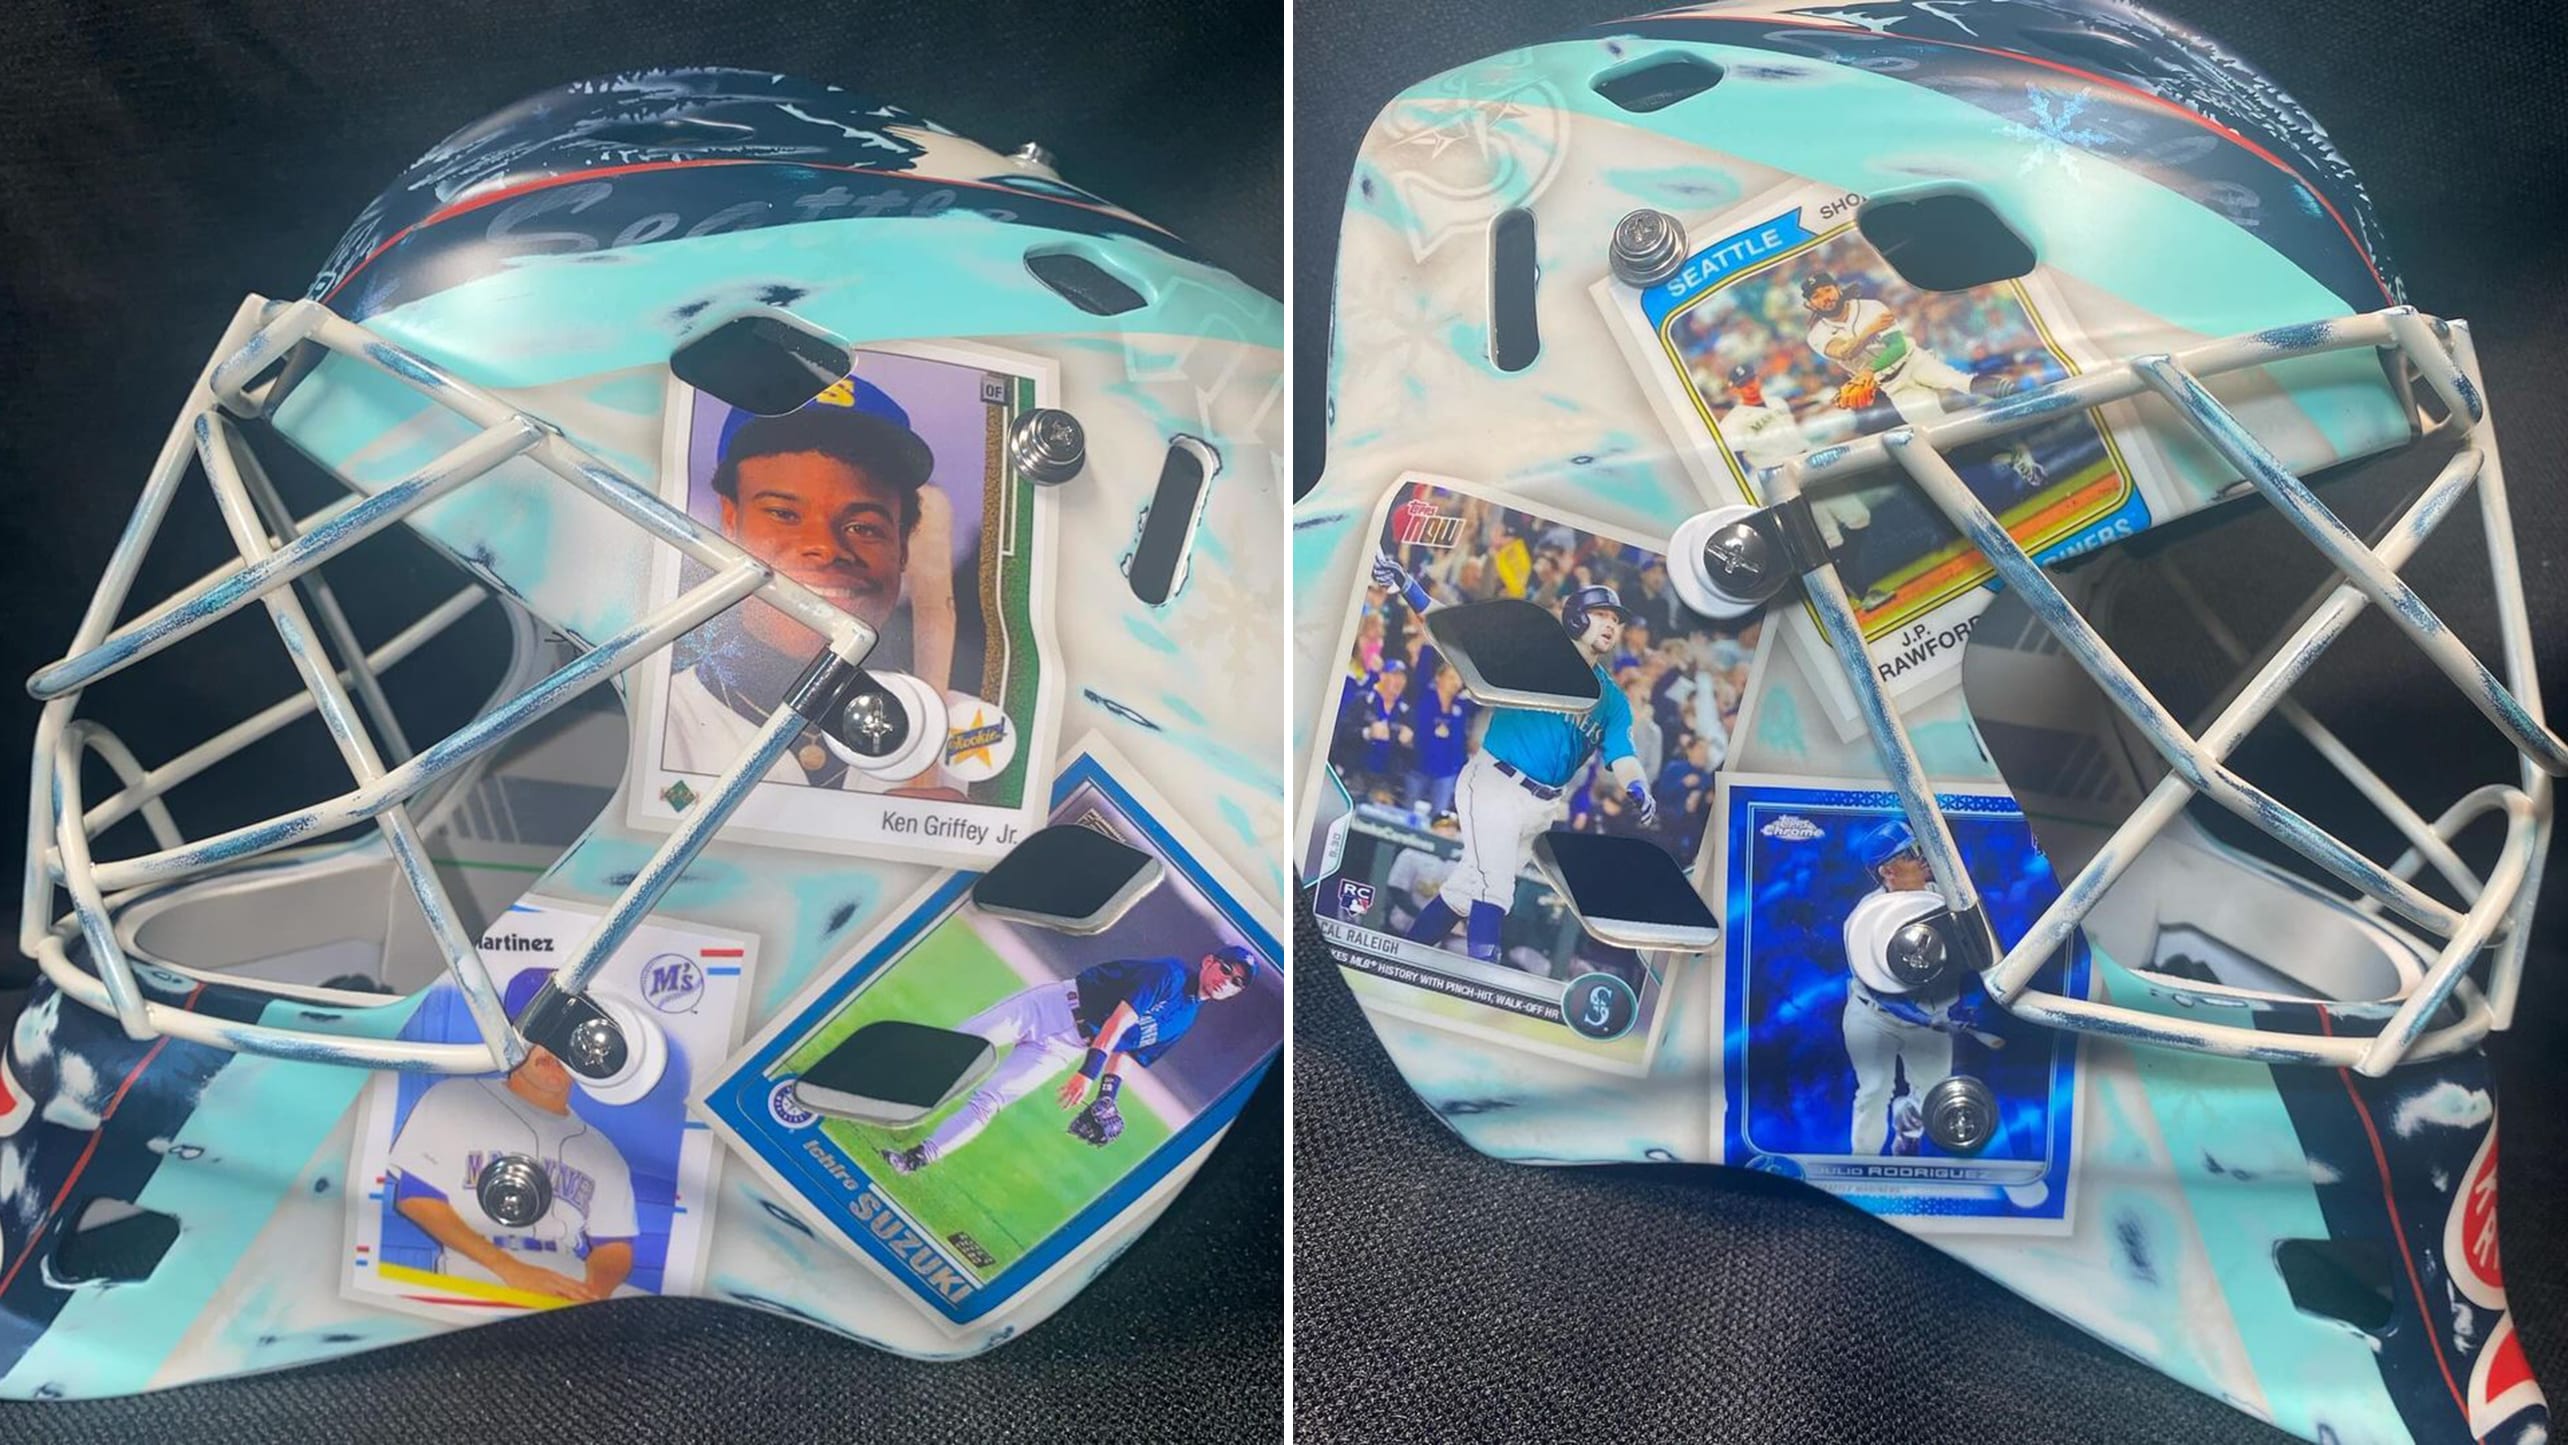 A goalie helmet adorned with baseball cards of Mariners players